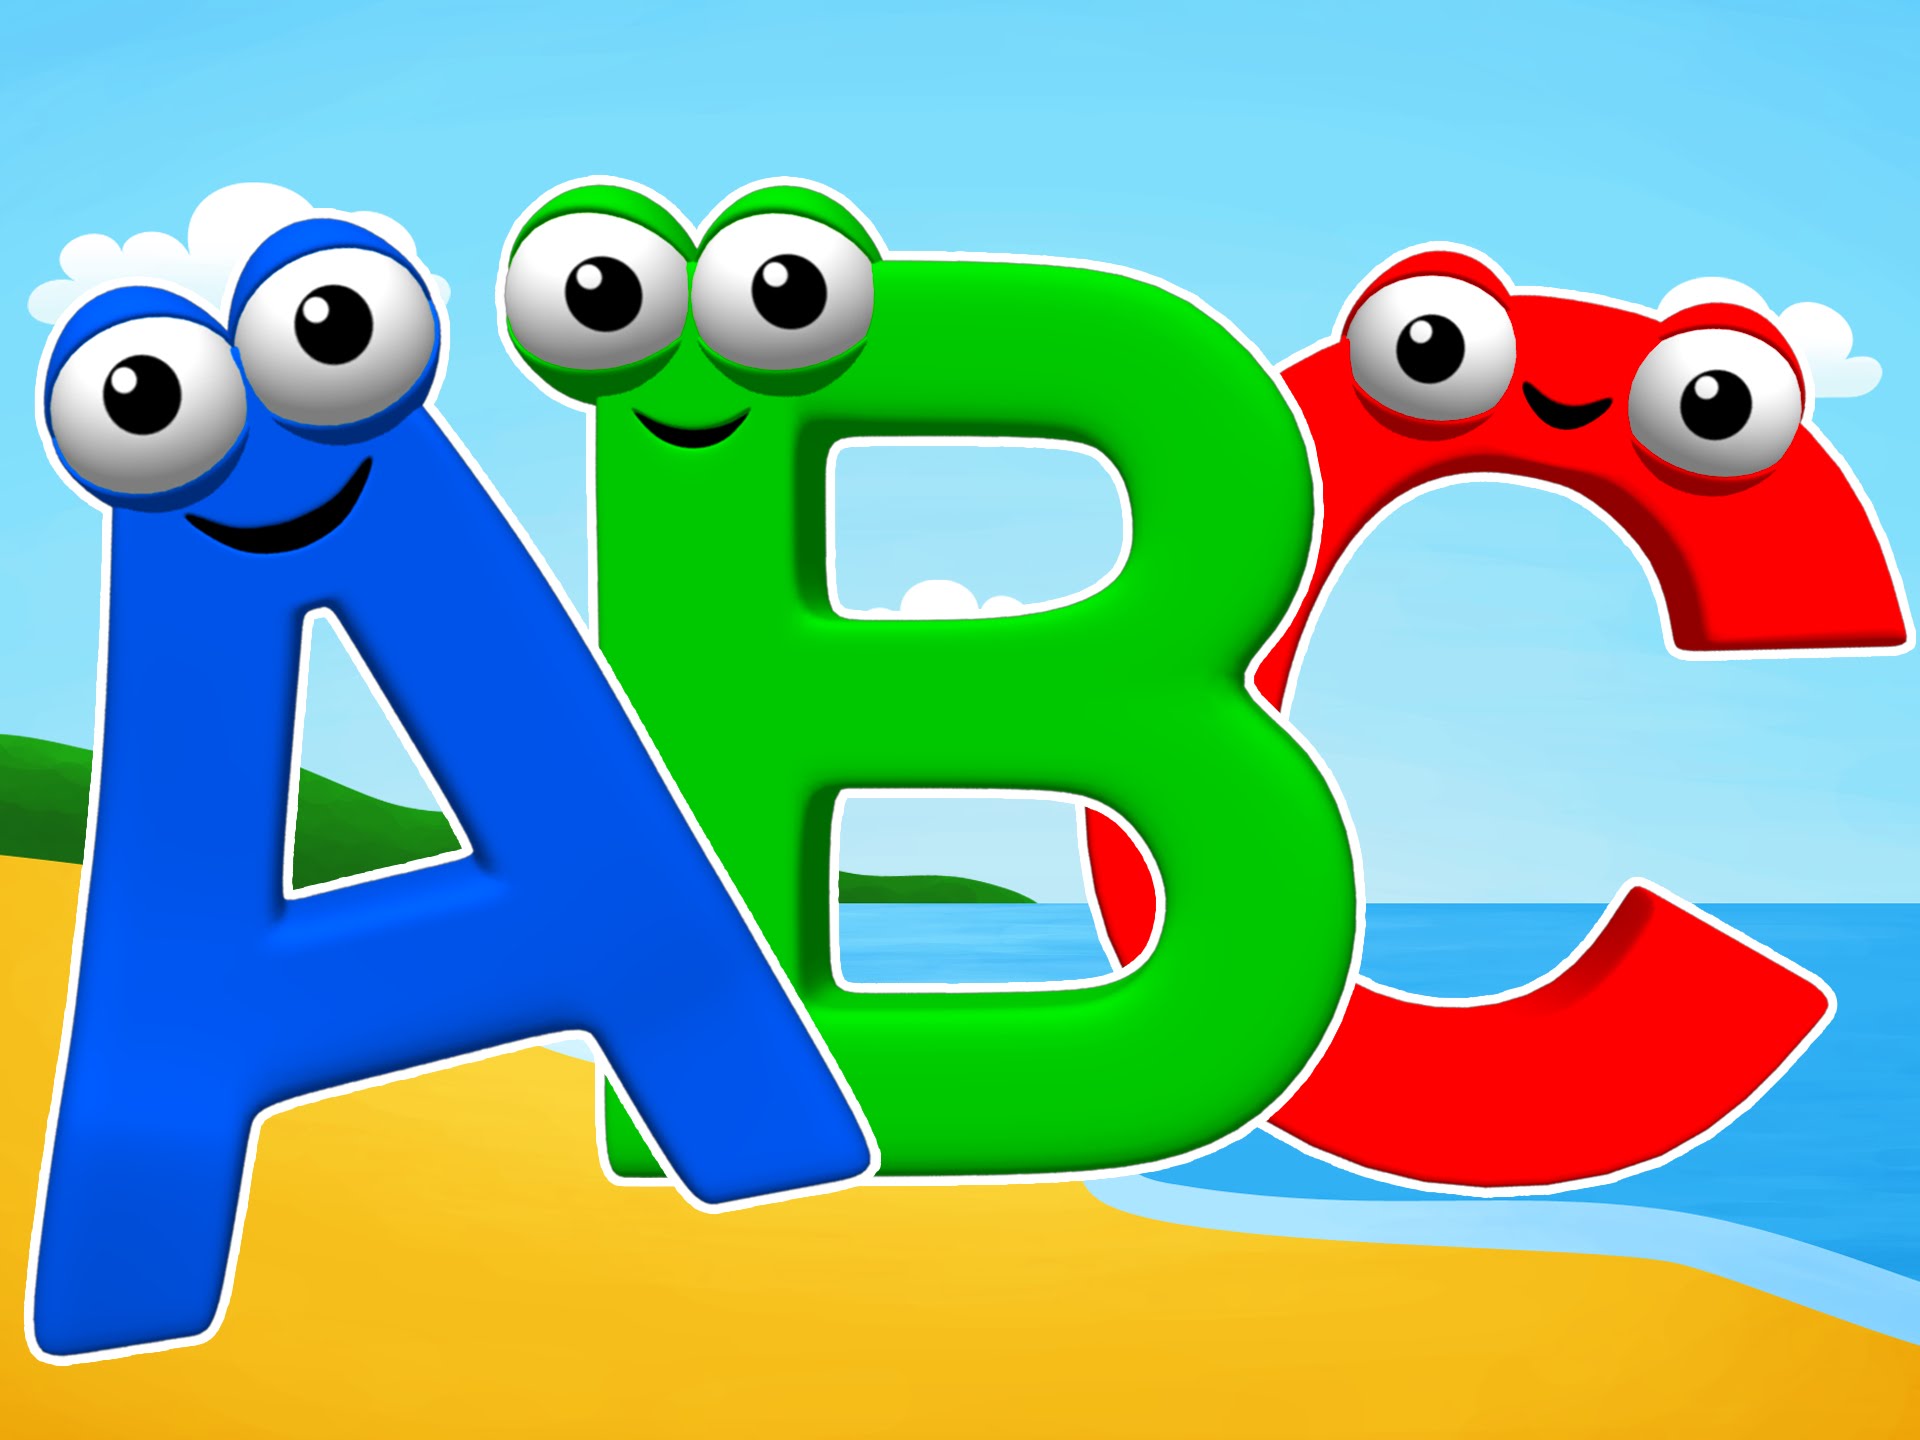 Abc clipart abcd, Abc abcd Transparent FREE for download on